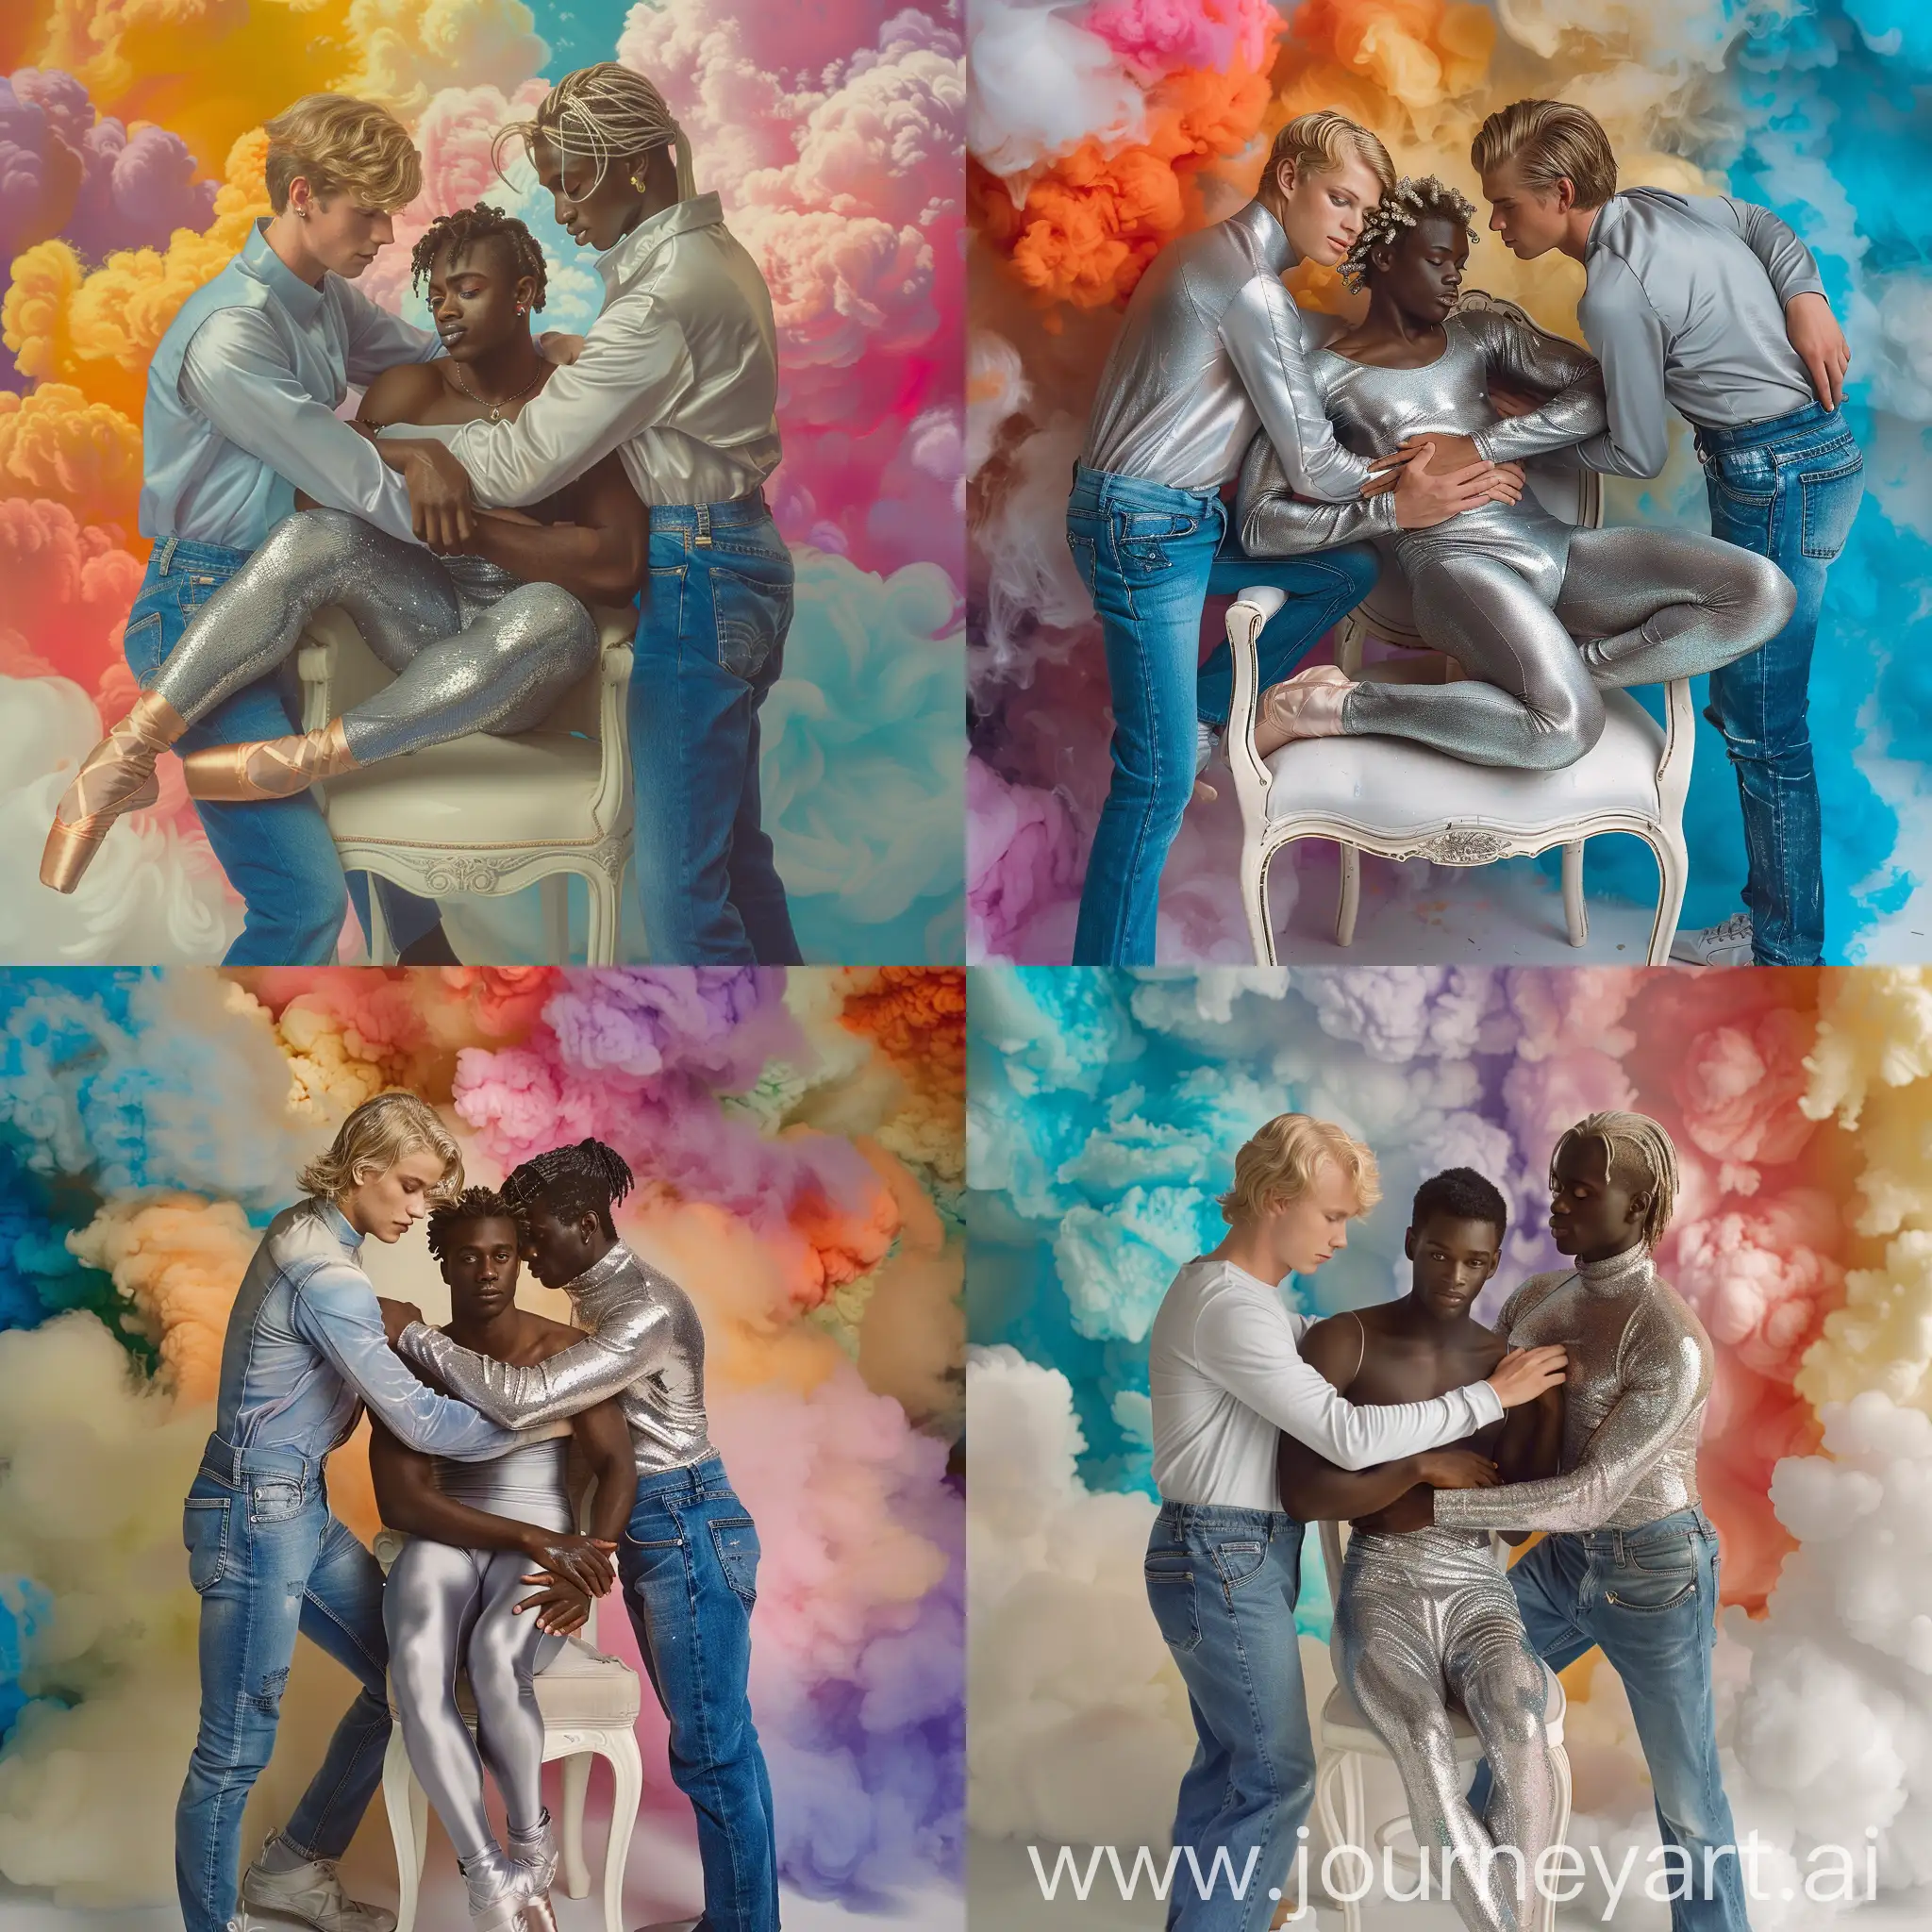 two handsome young blond males, dressed in  blue jeans, are hugging a beautiful black male balletdancer, dressed in silver outfit, sitting on a white chair, surrounded by colorful clouds
